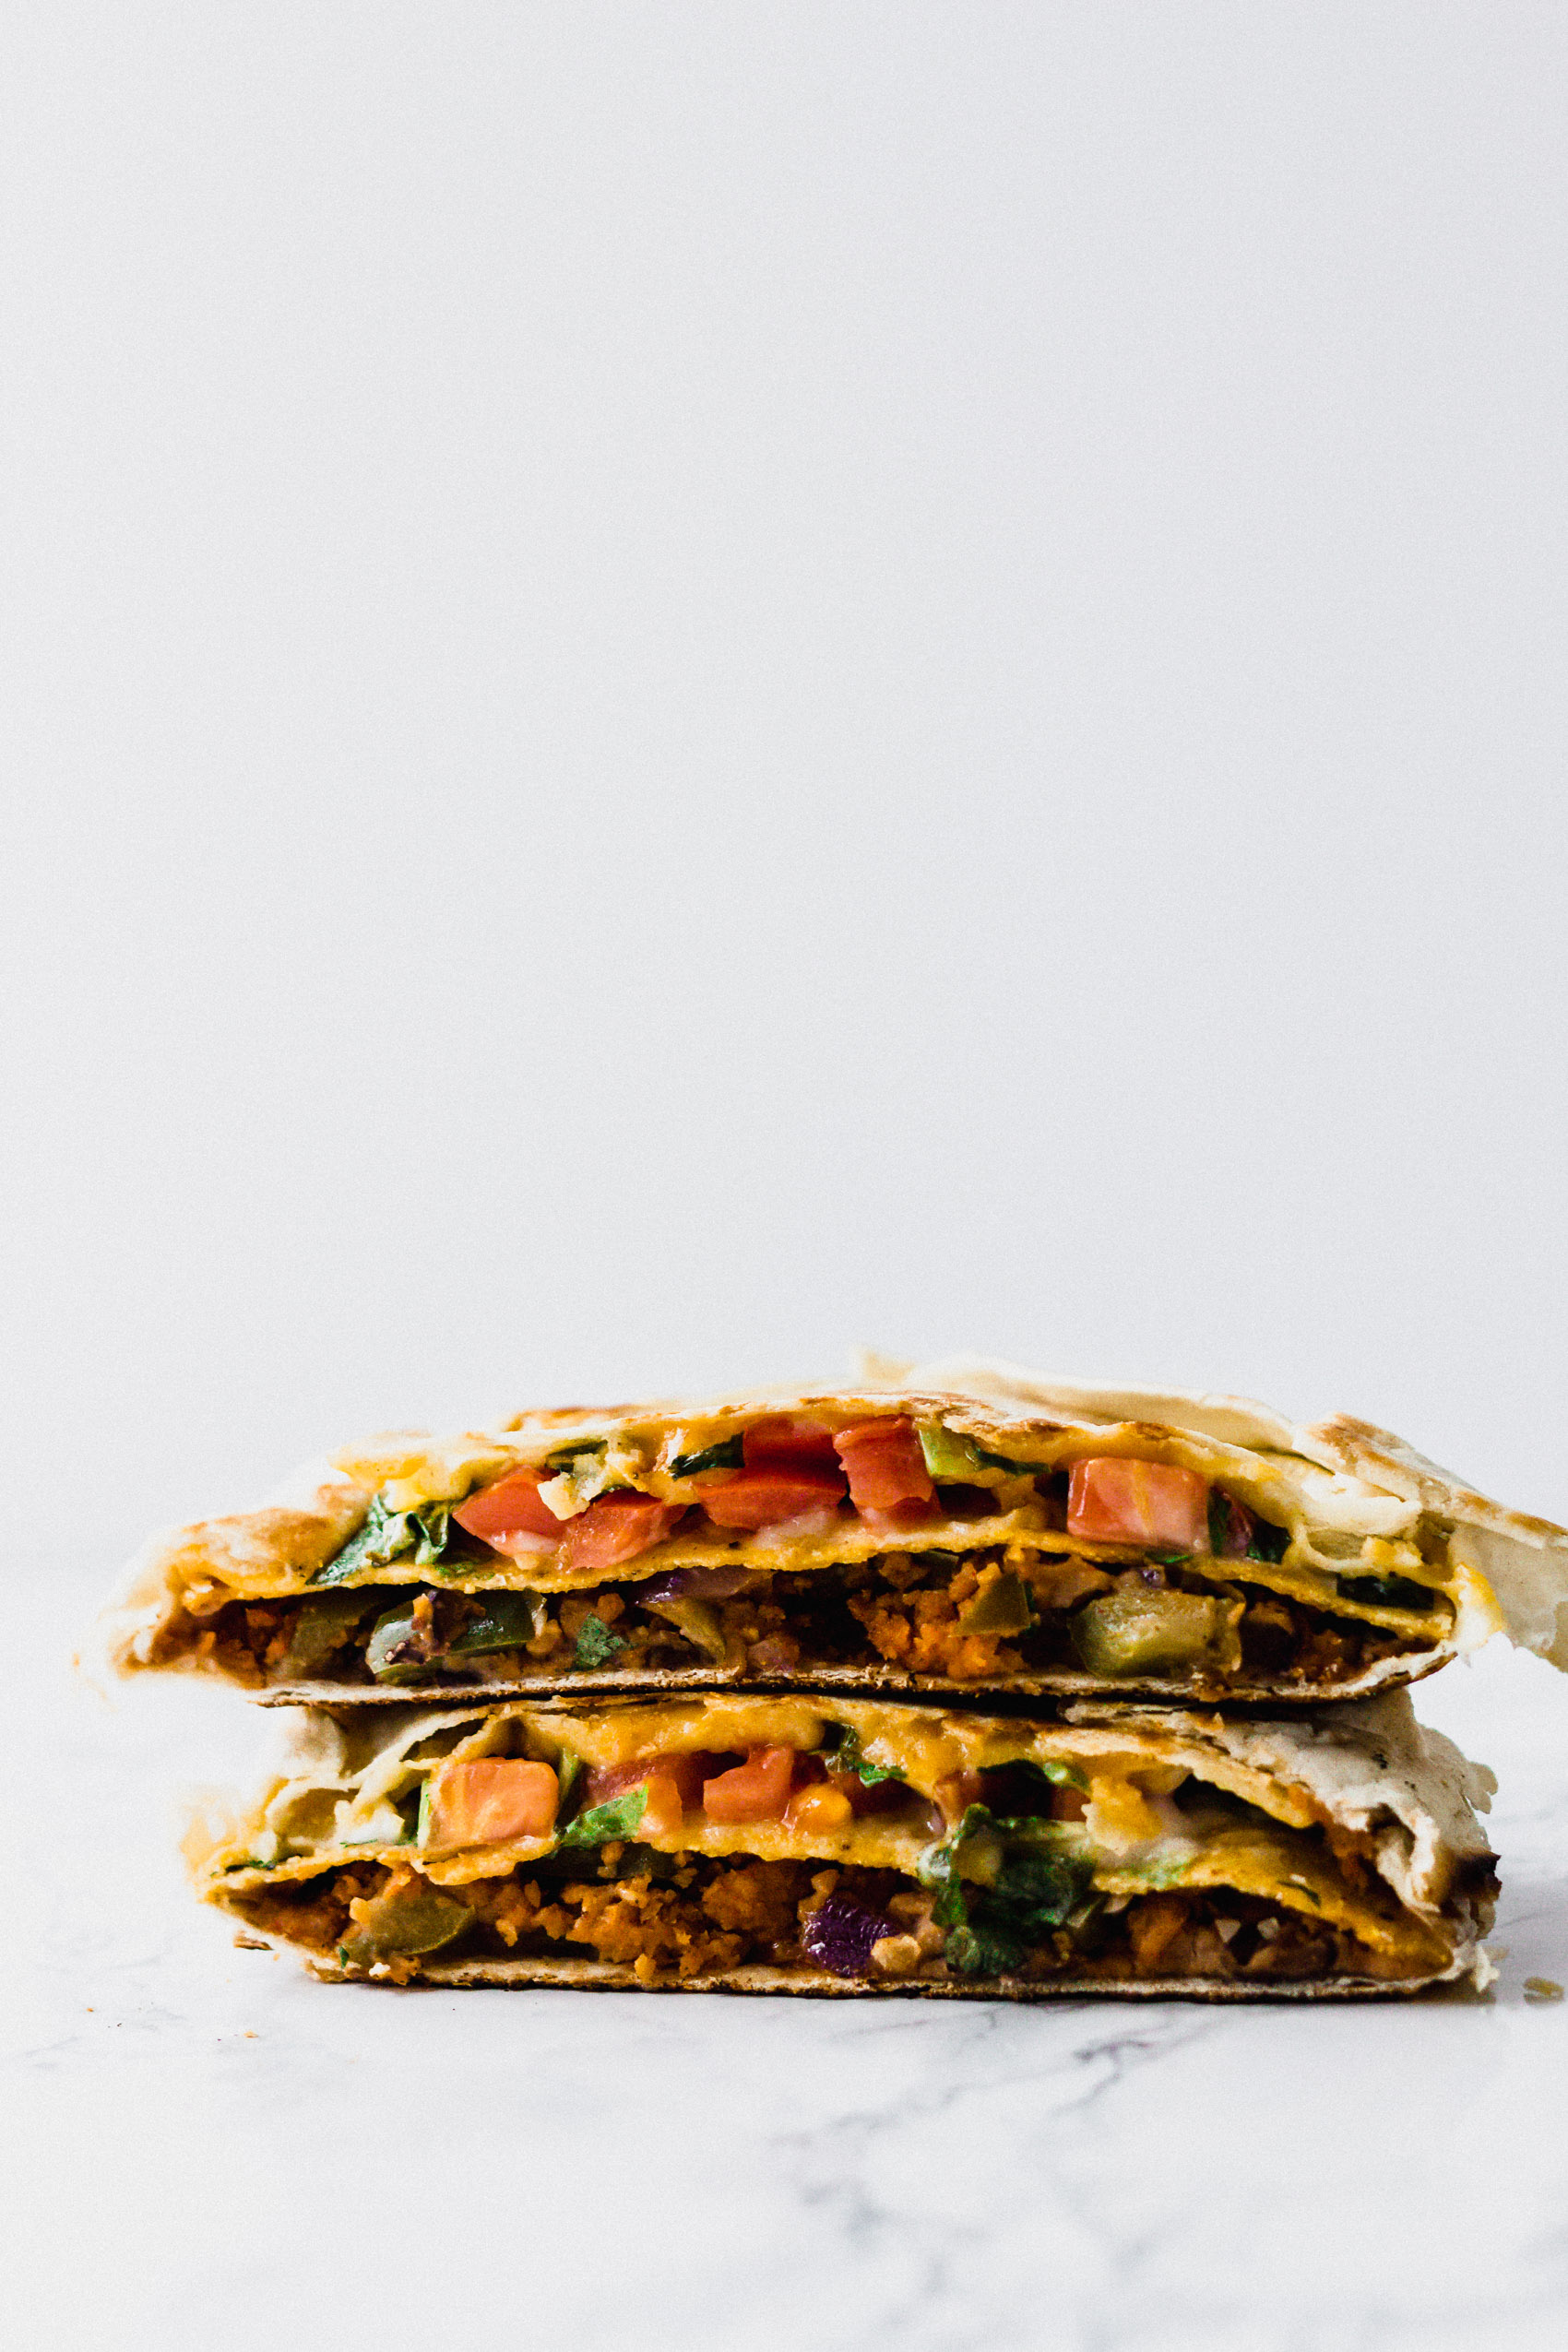 two halves of a tortilla filled with vegan meat, cheese, and vegetables cut in half